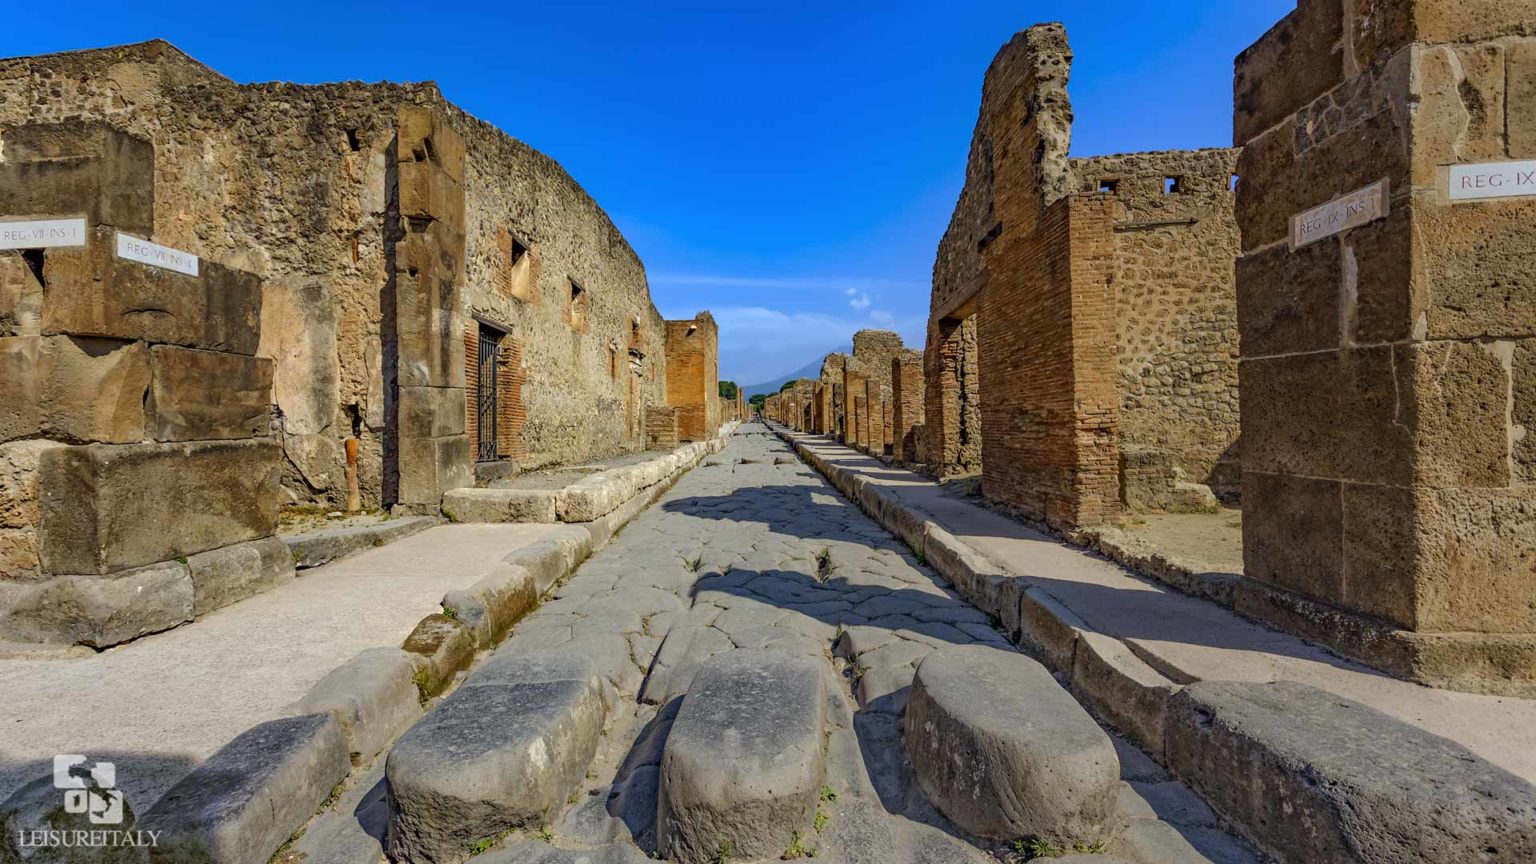 The best time to visit Pompeii and Herculaneum - Leisure Italy